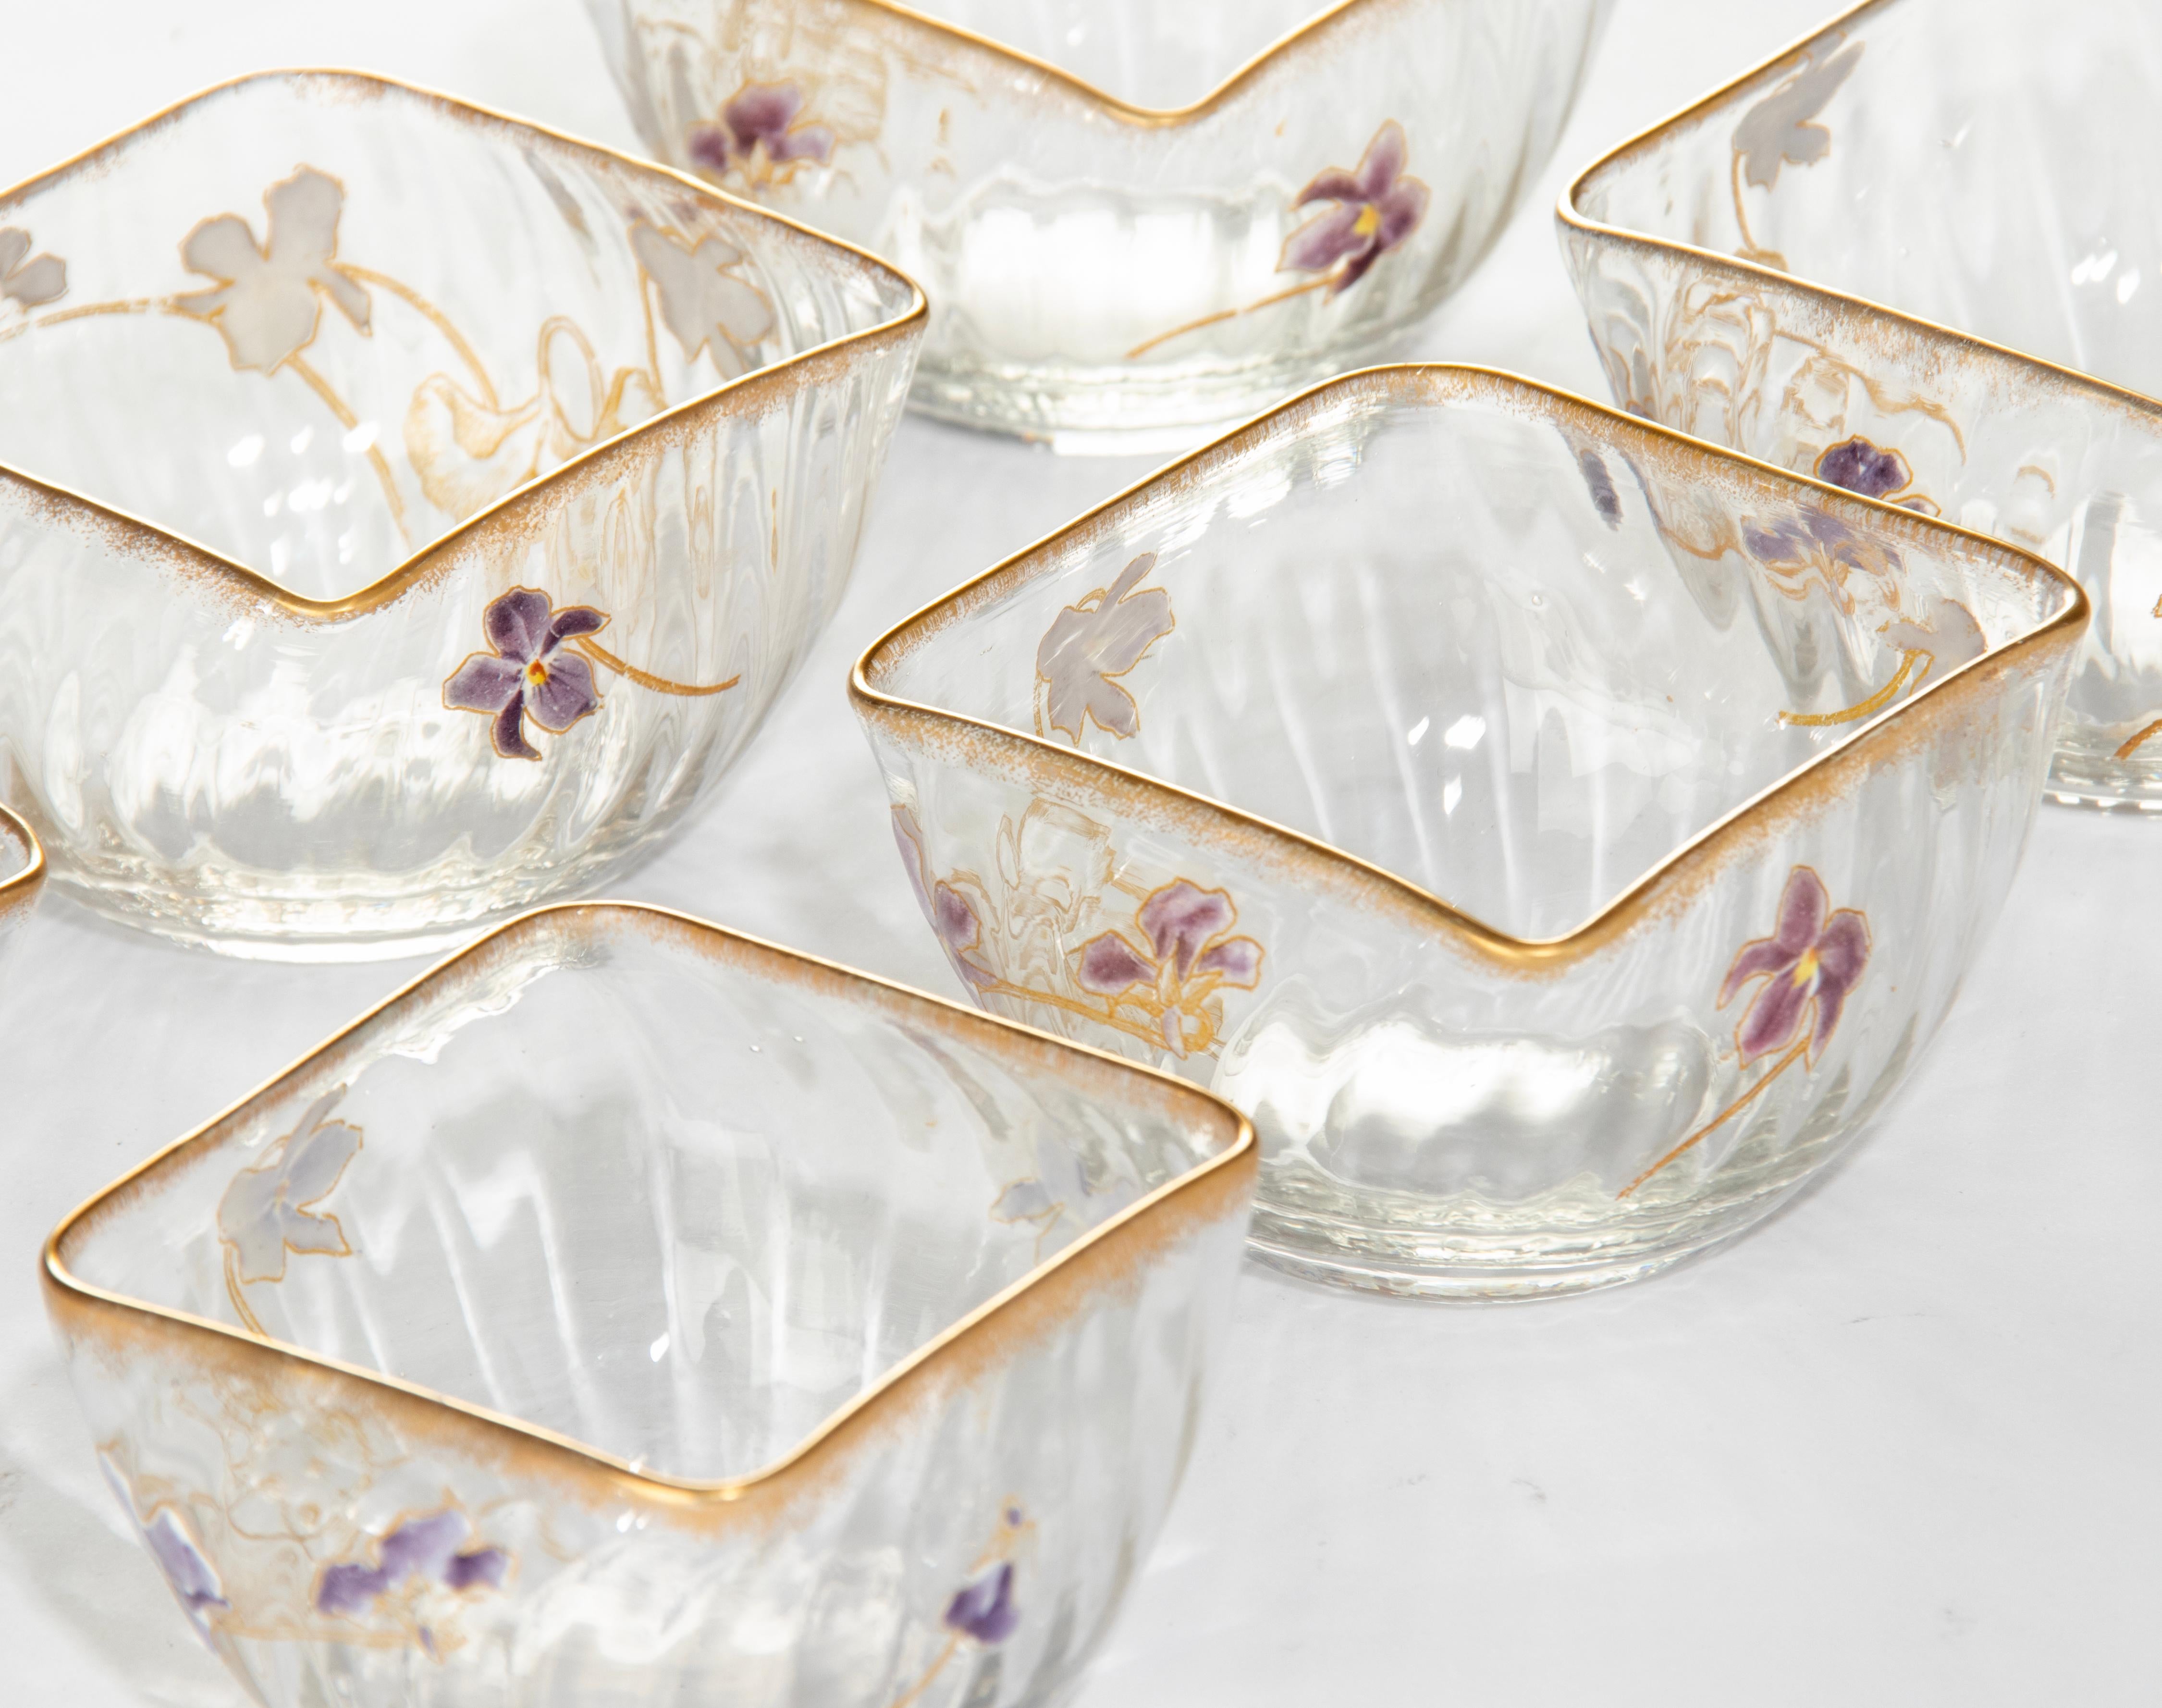 Set of 6 Crystal Art Nouveau Bowls Hand Painted with Flowers Attr. to Daum Nancy For Sale 3